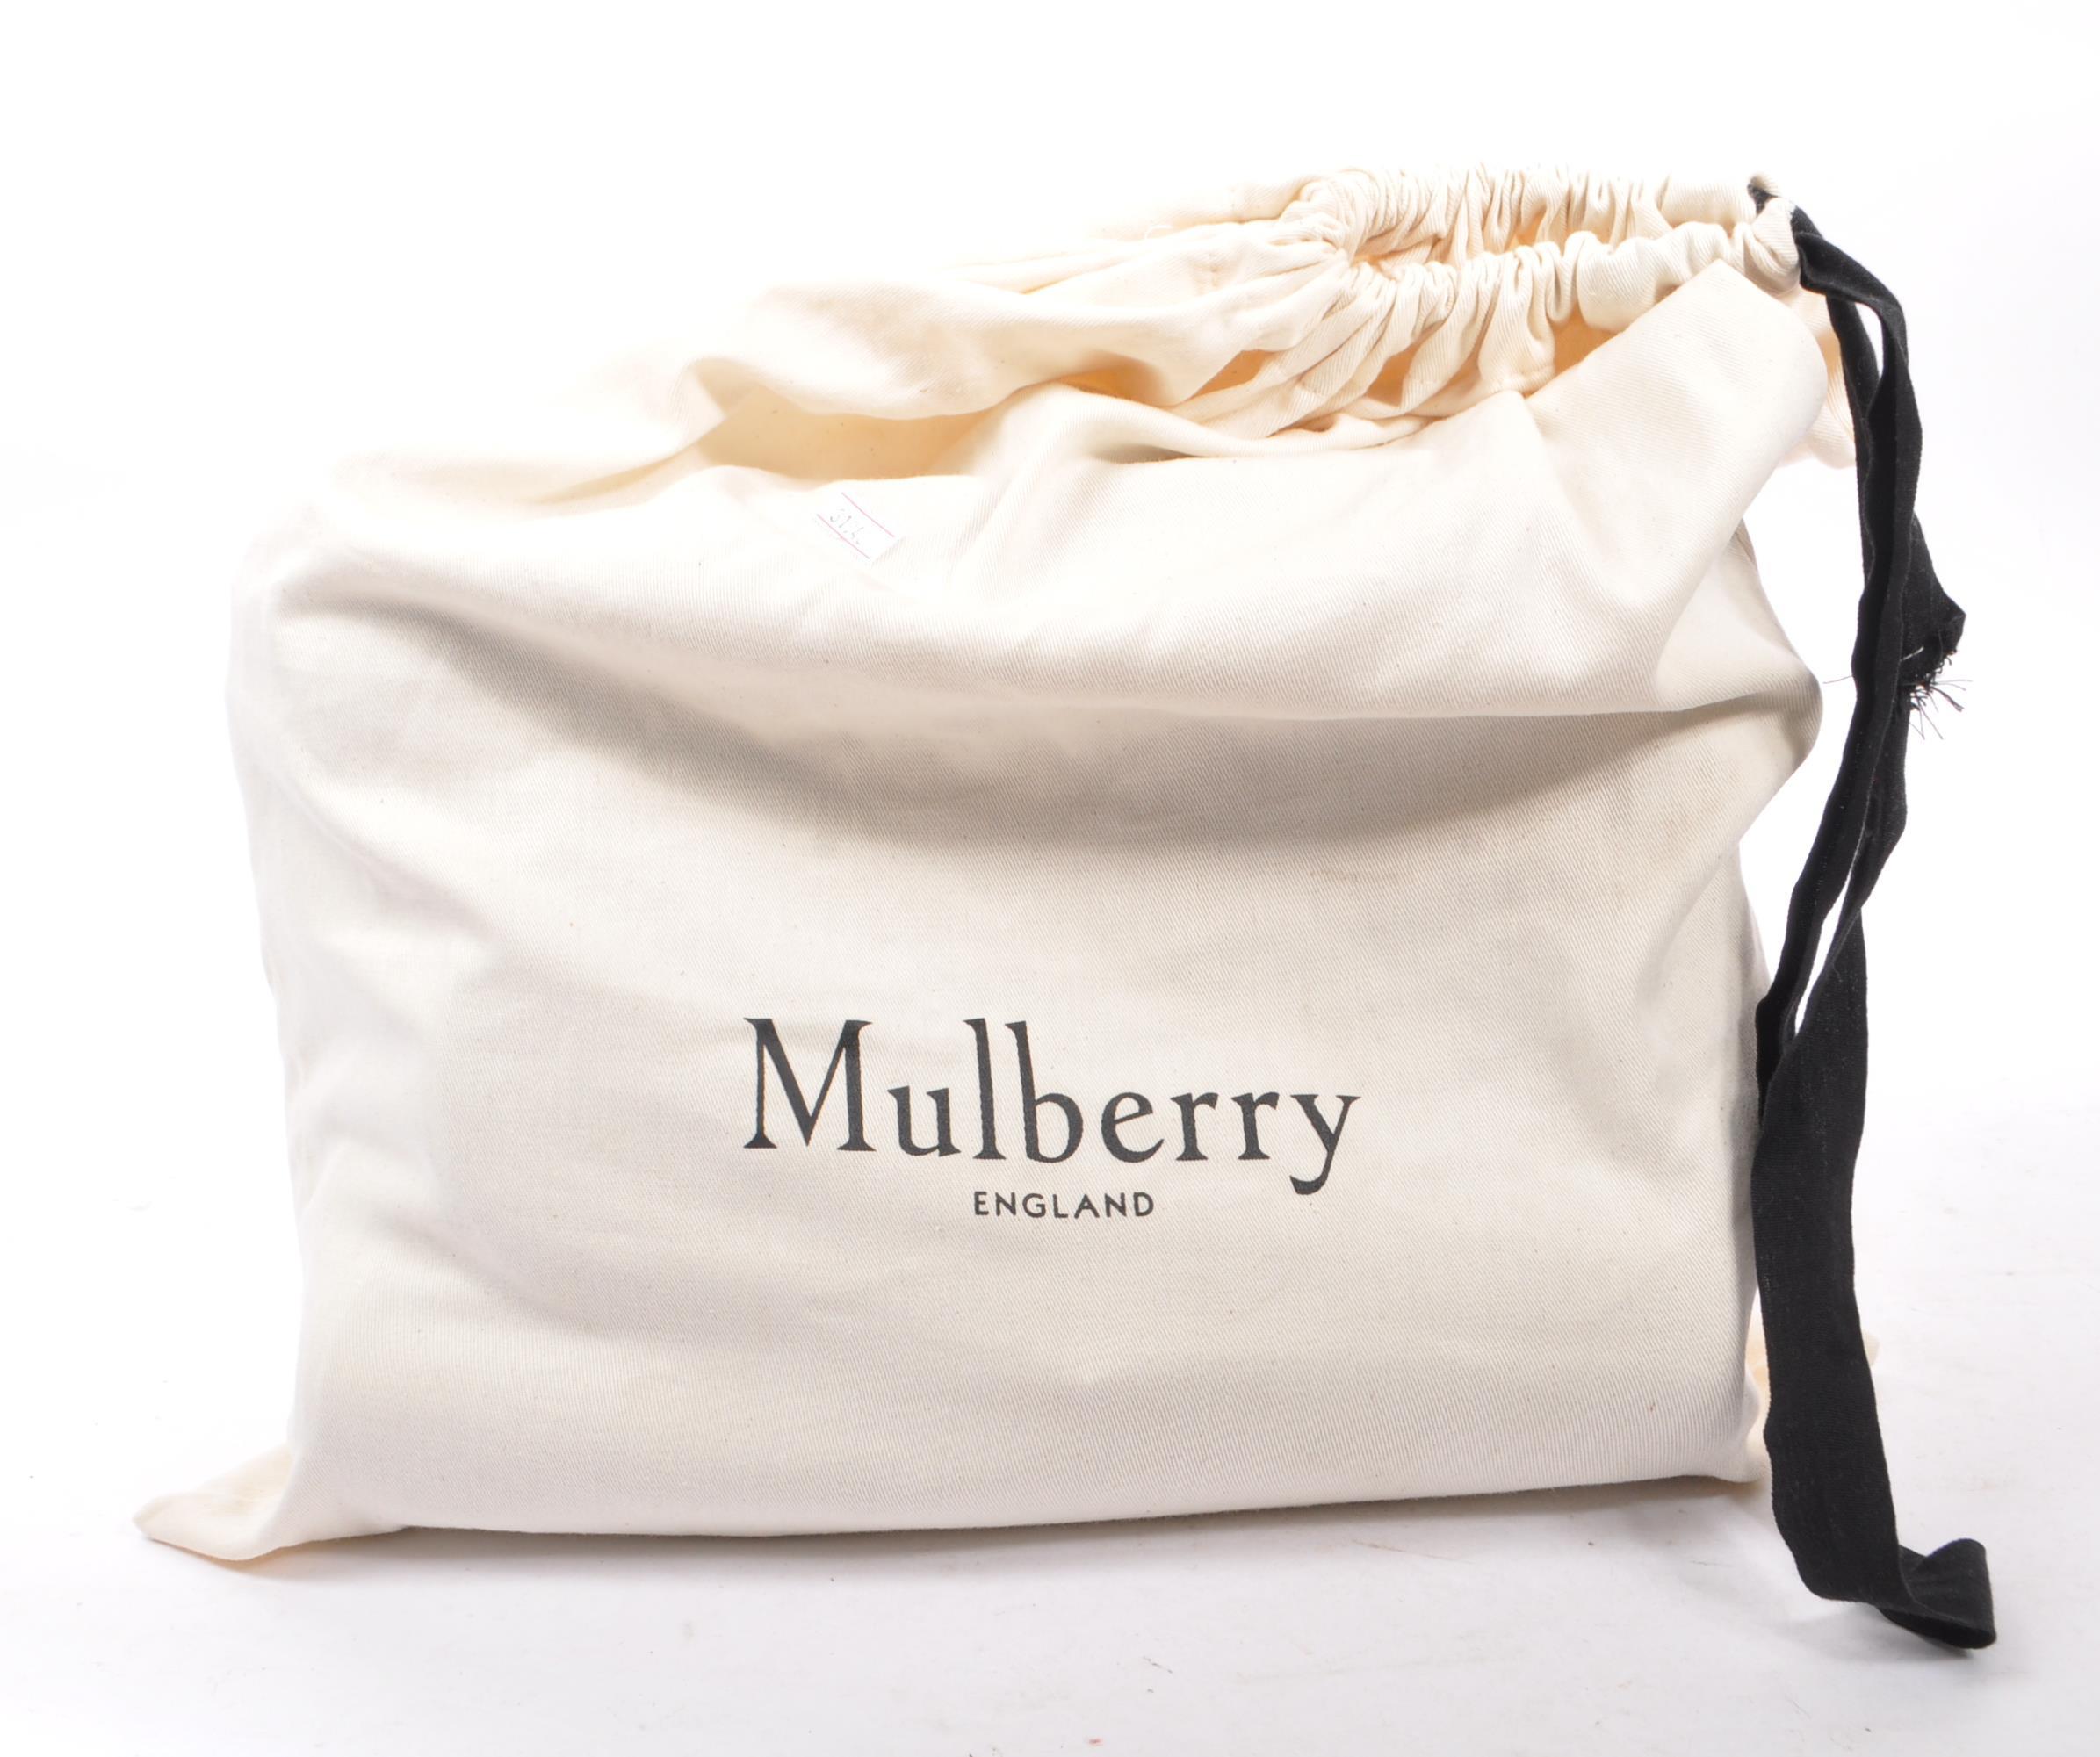 MULBERRY - LONDON - CONTEMPORARY LEATHER DESIGNER BAG - Image 7 of 7